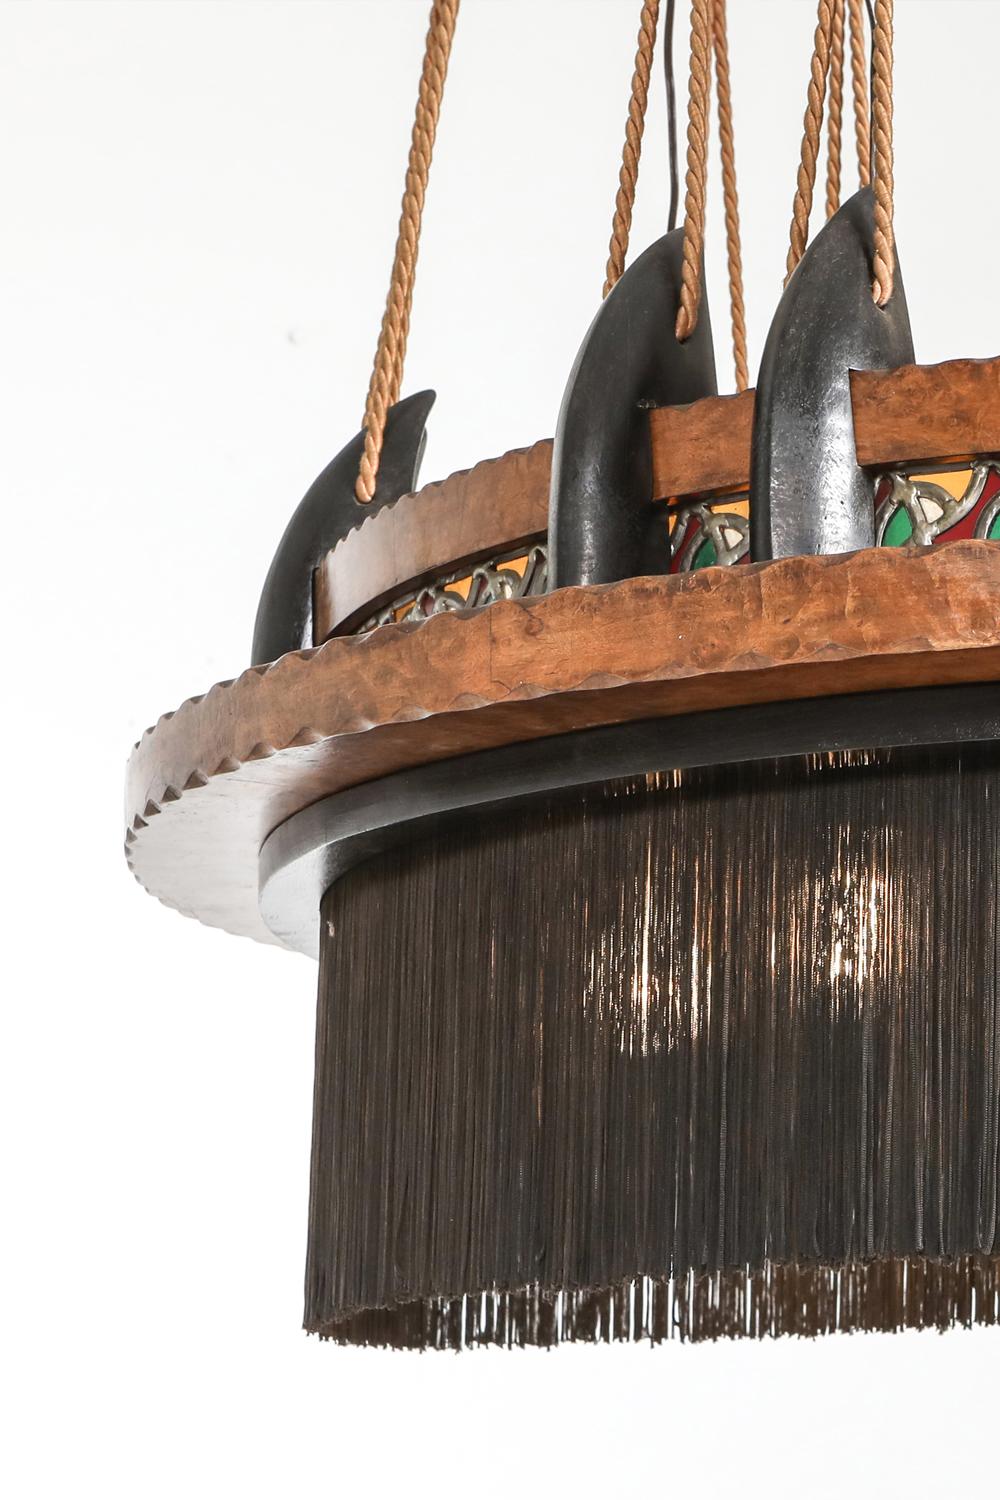 Amsterdam School Chandelier in Ebony, Carved Wood, Glass in Lead and Silk For Sale 3